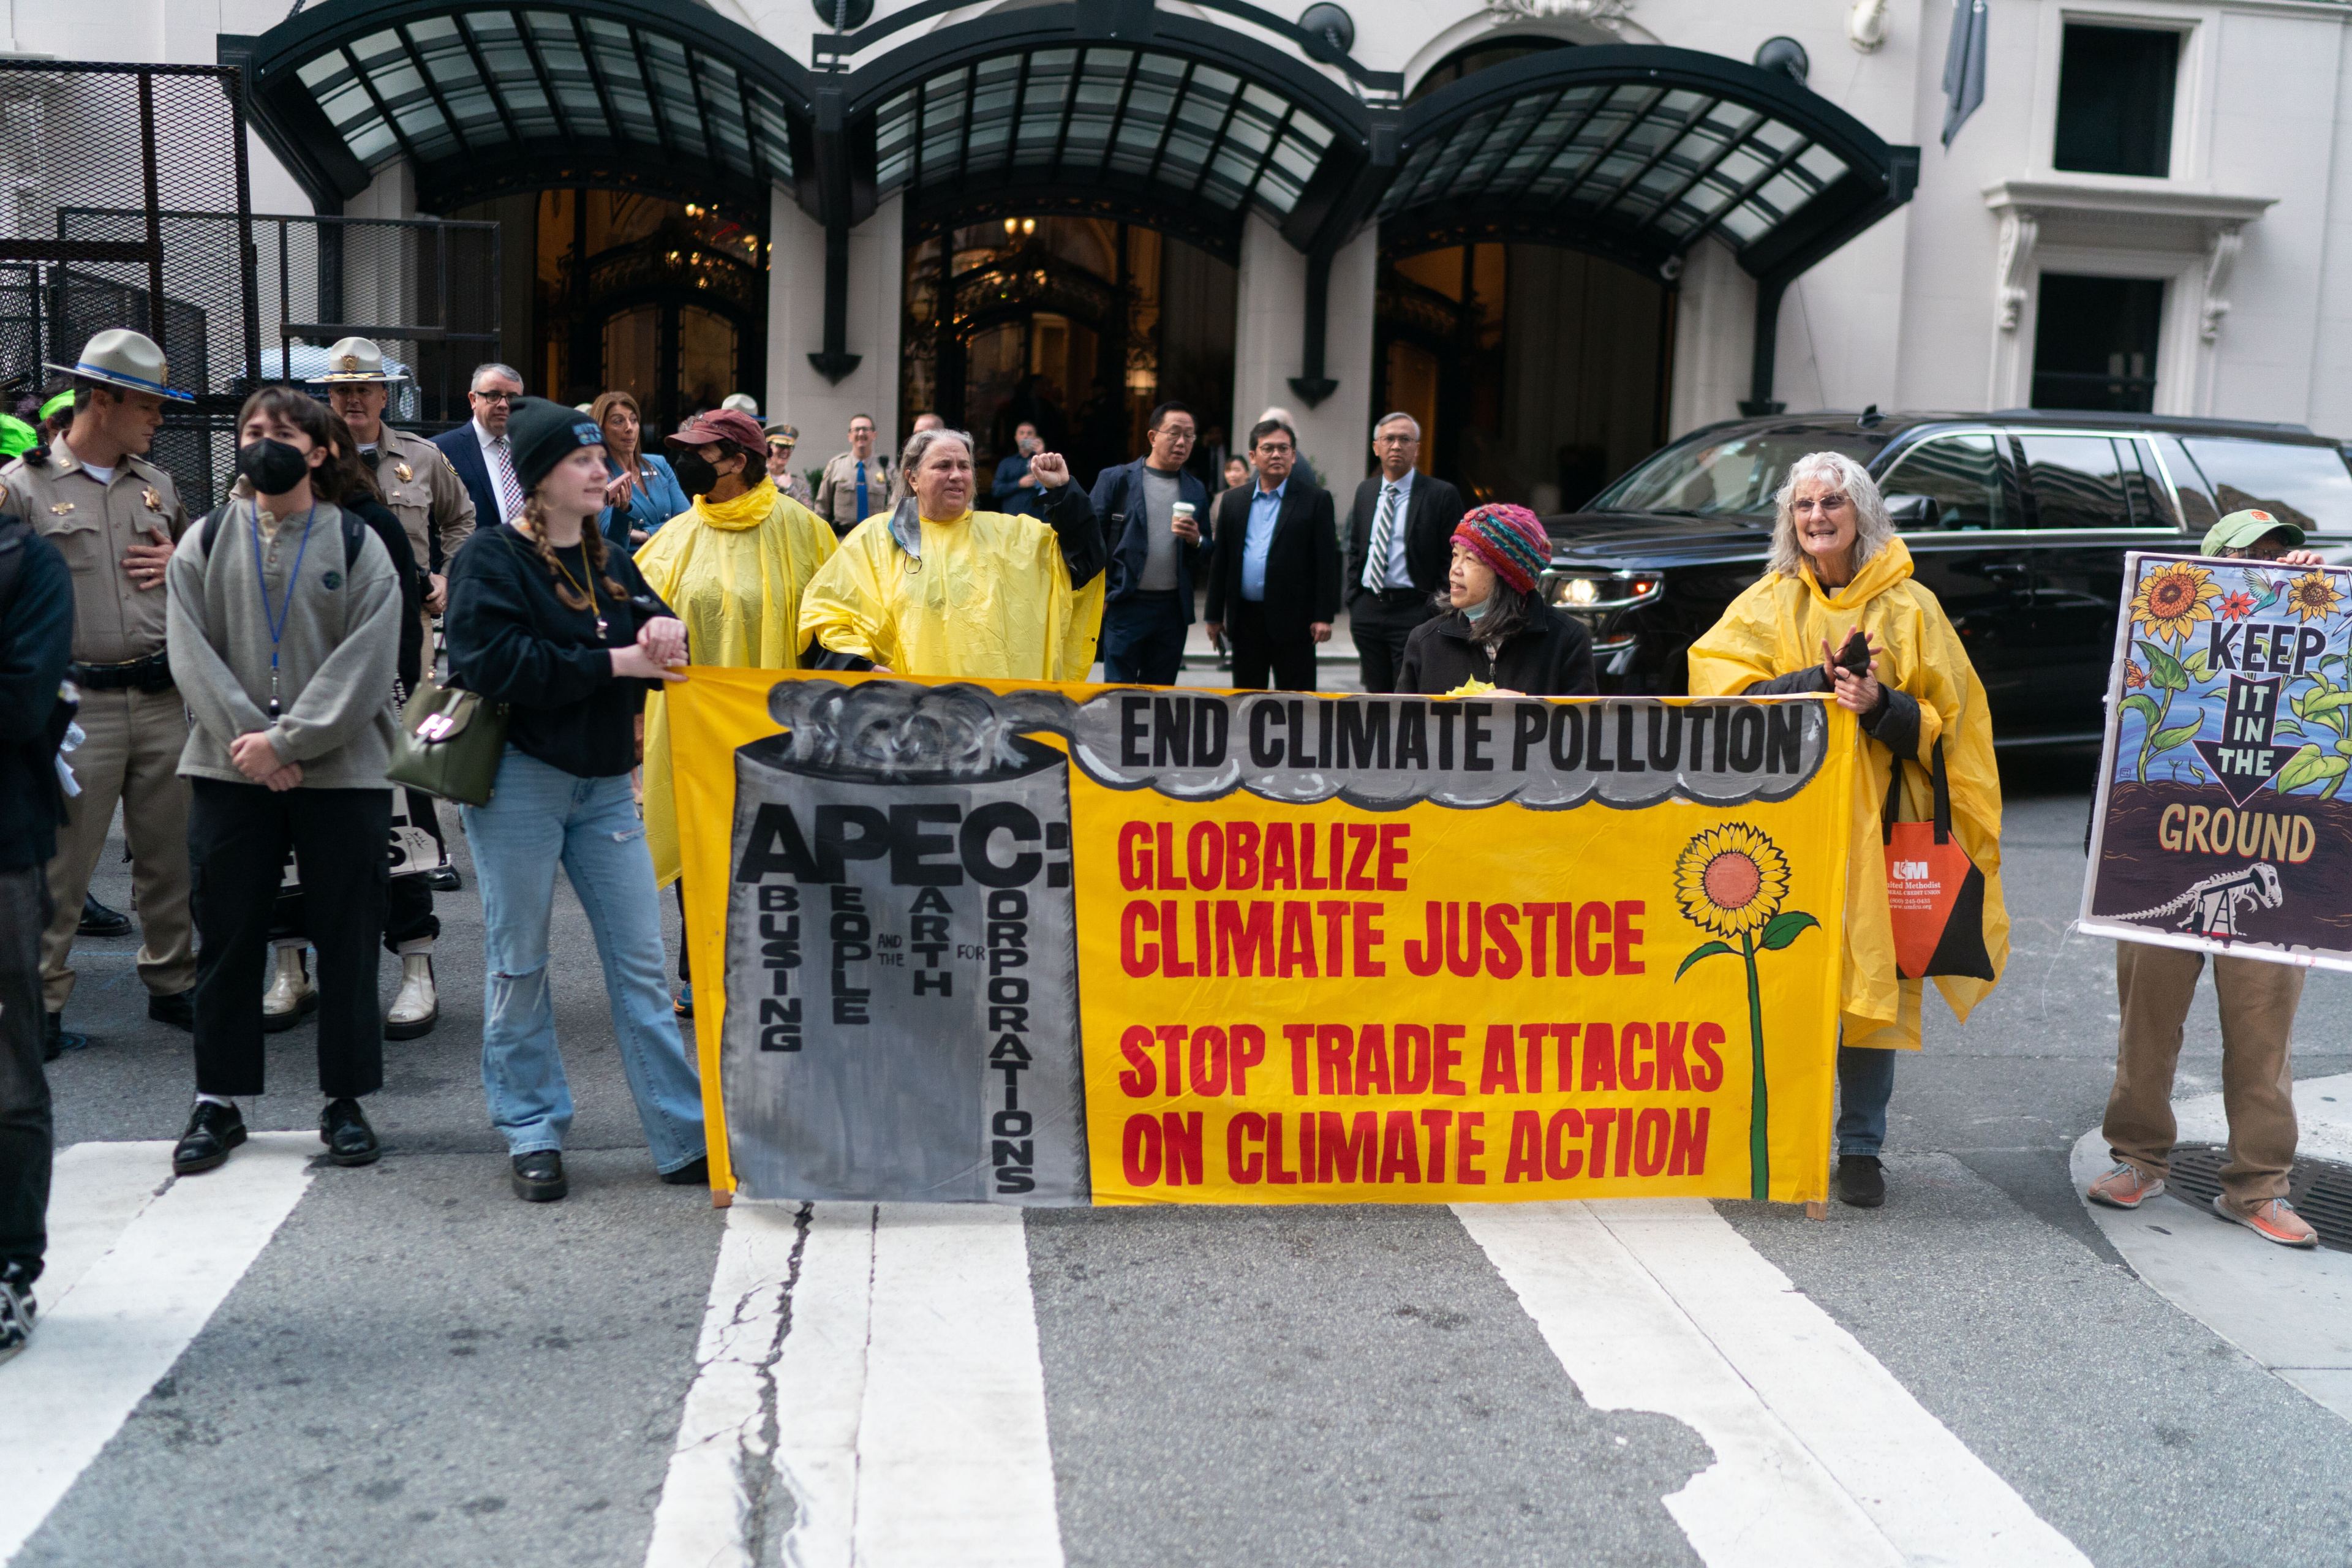 Protesters stand in the middle of the street with and &quot;End Climate Pollution&quot; banner.